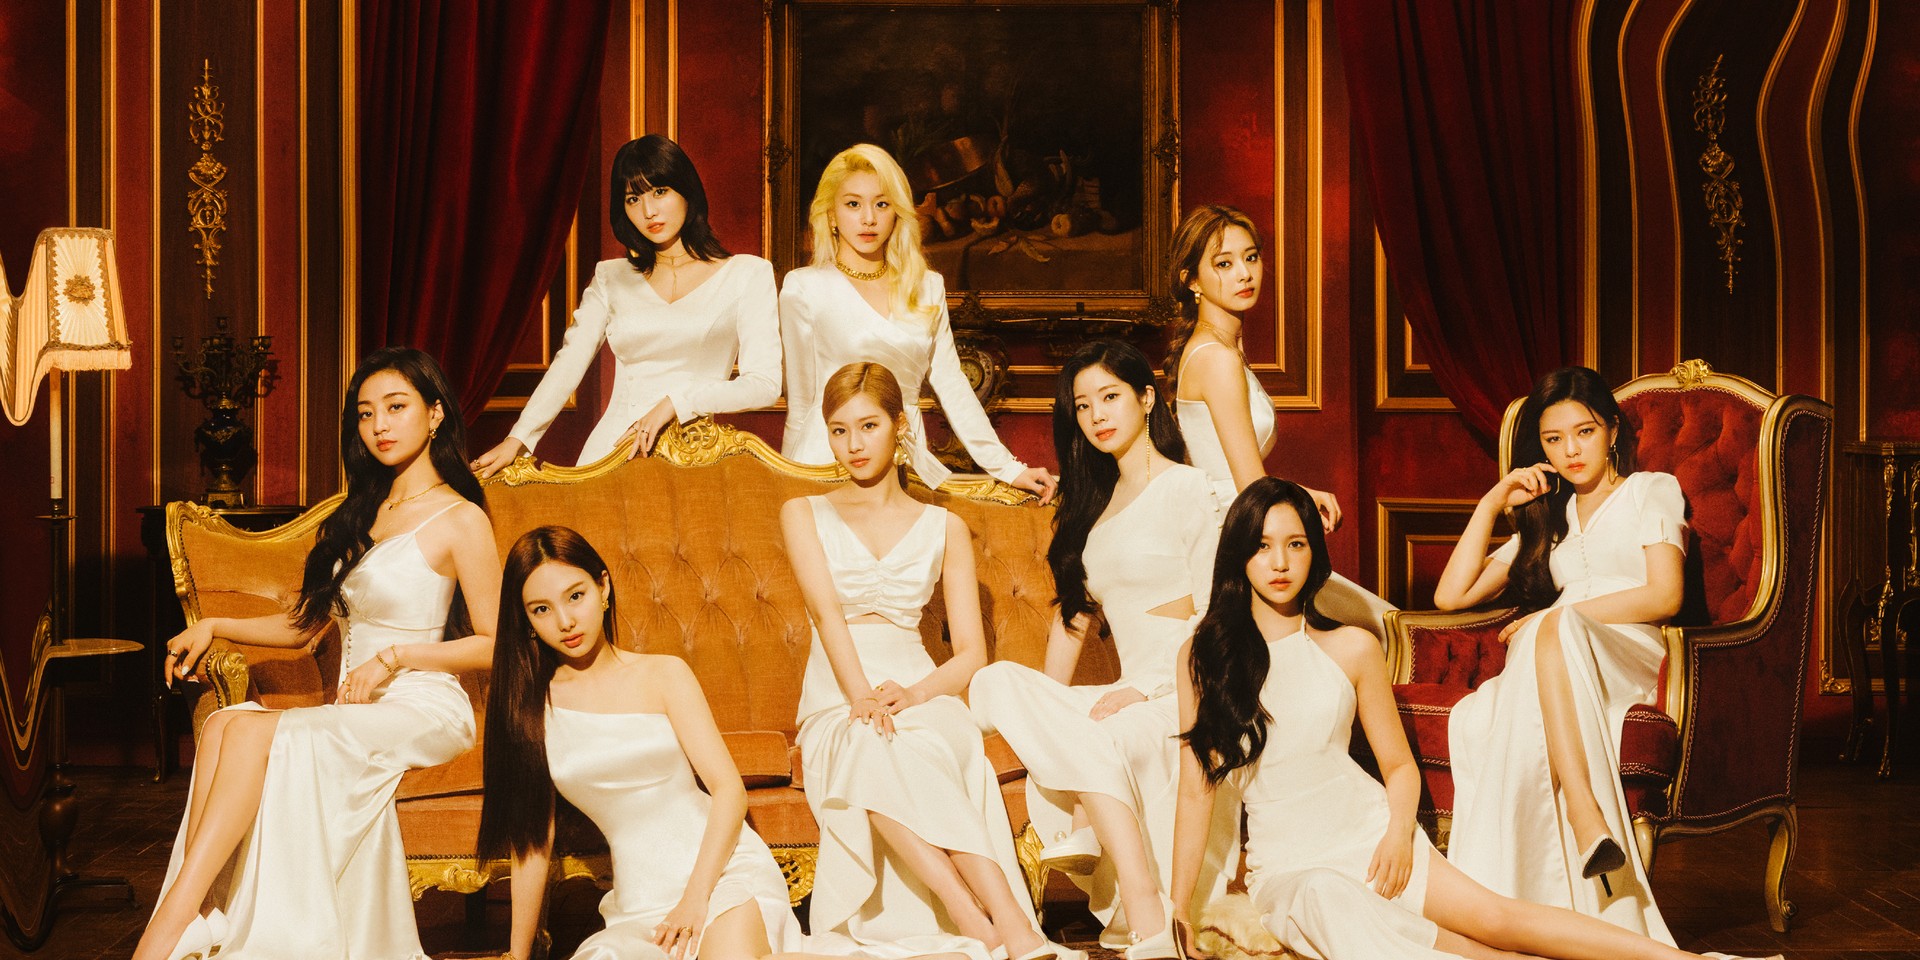 Twice Are Releasing Their First English Single This September